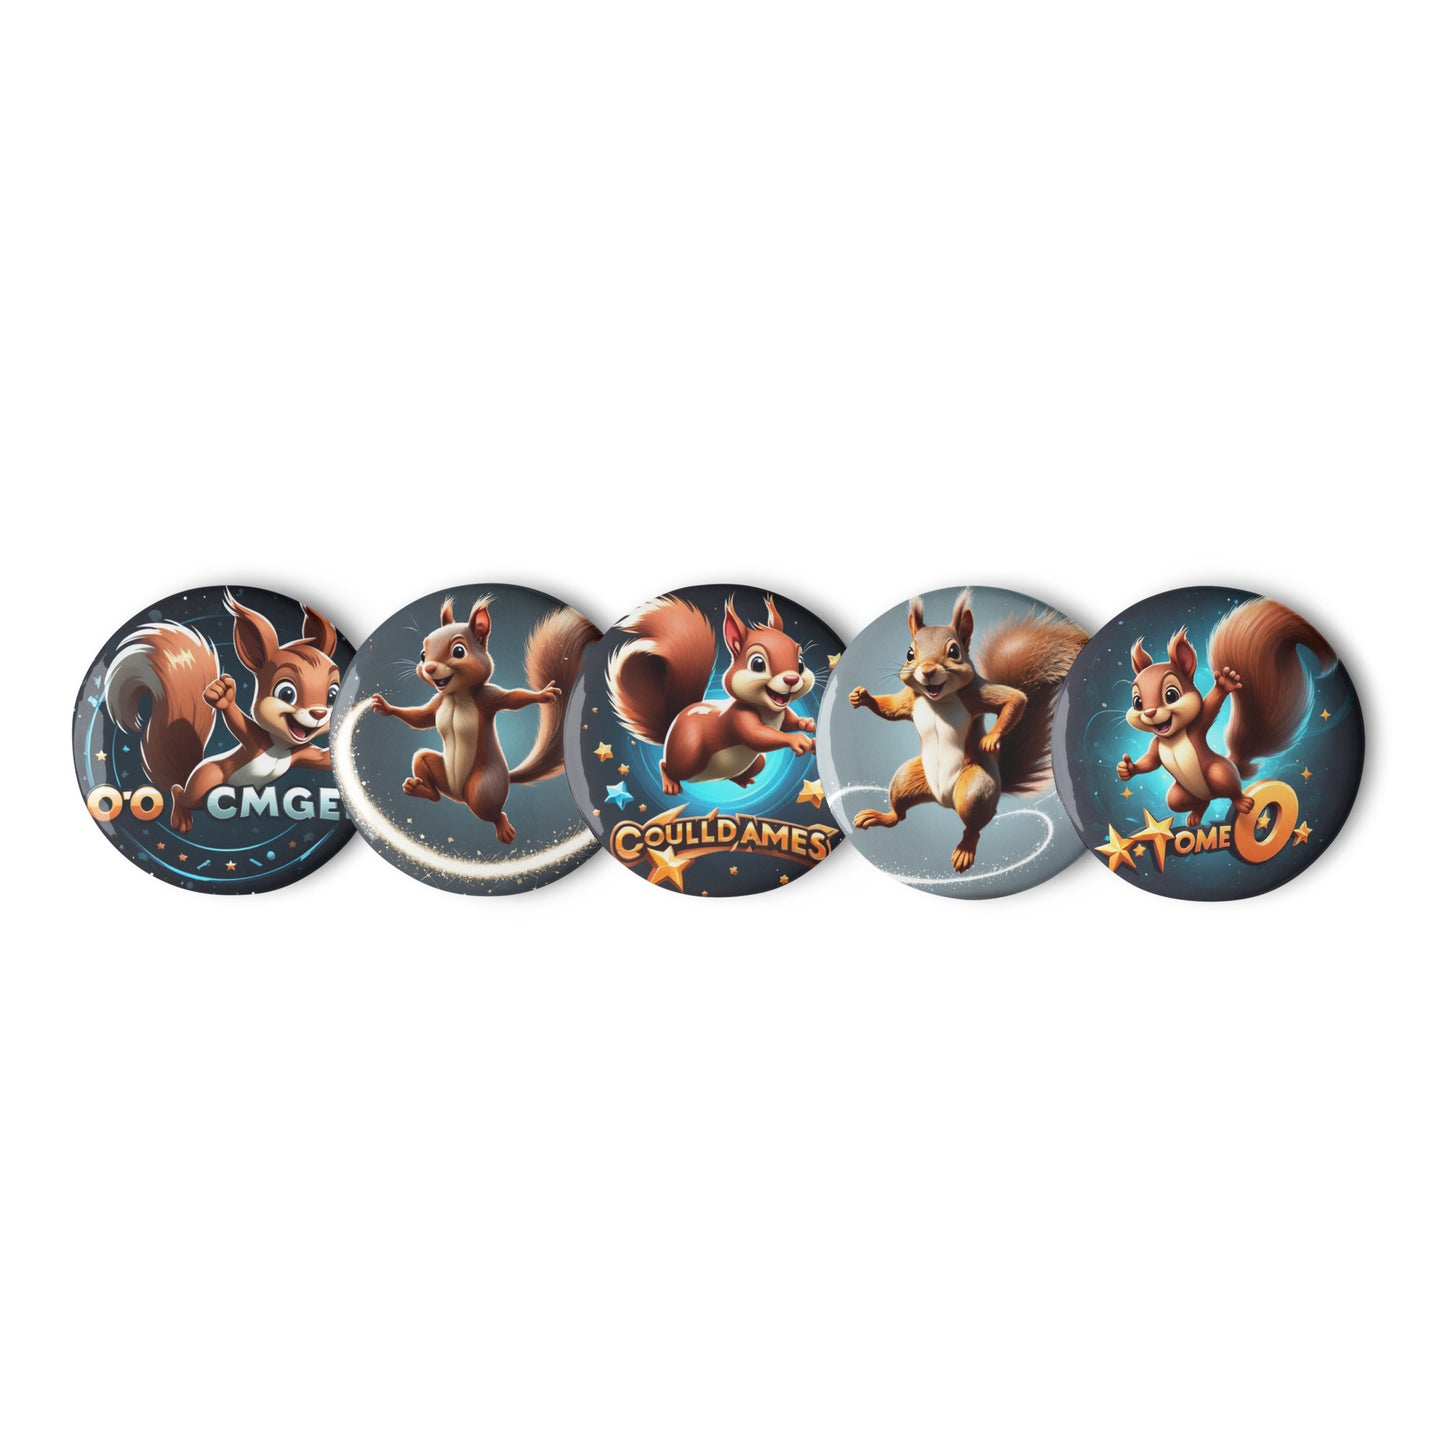 Set of Adventure Squirrel Pin Buttons